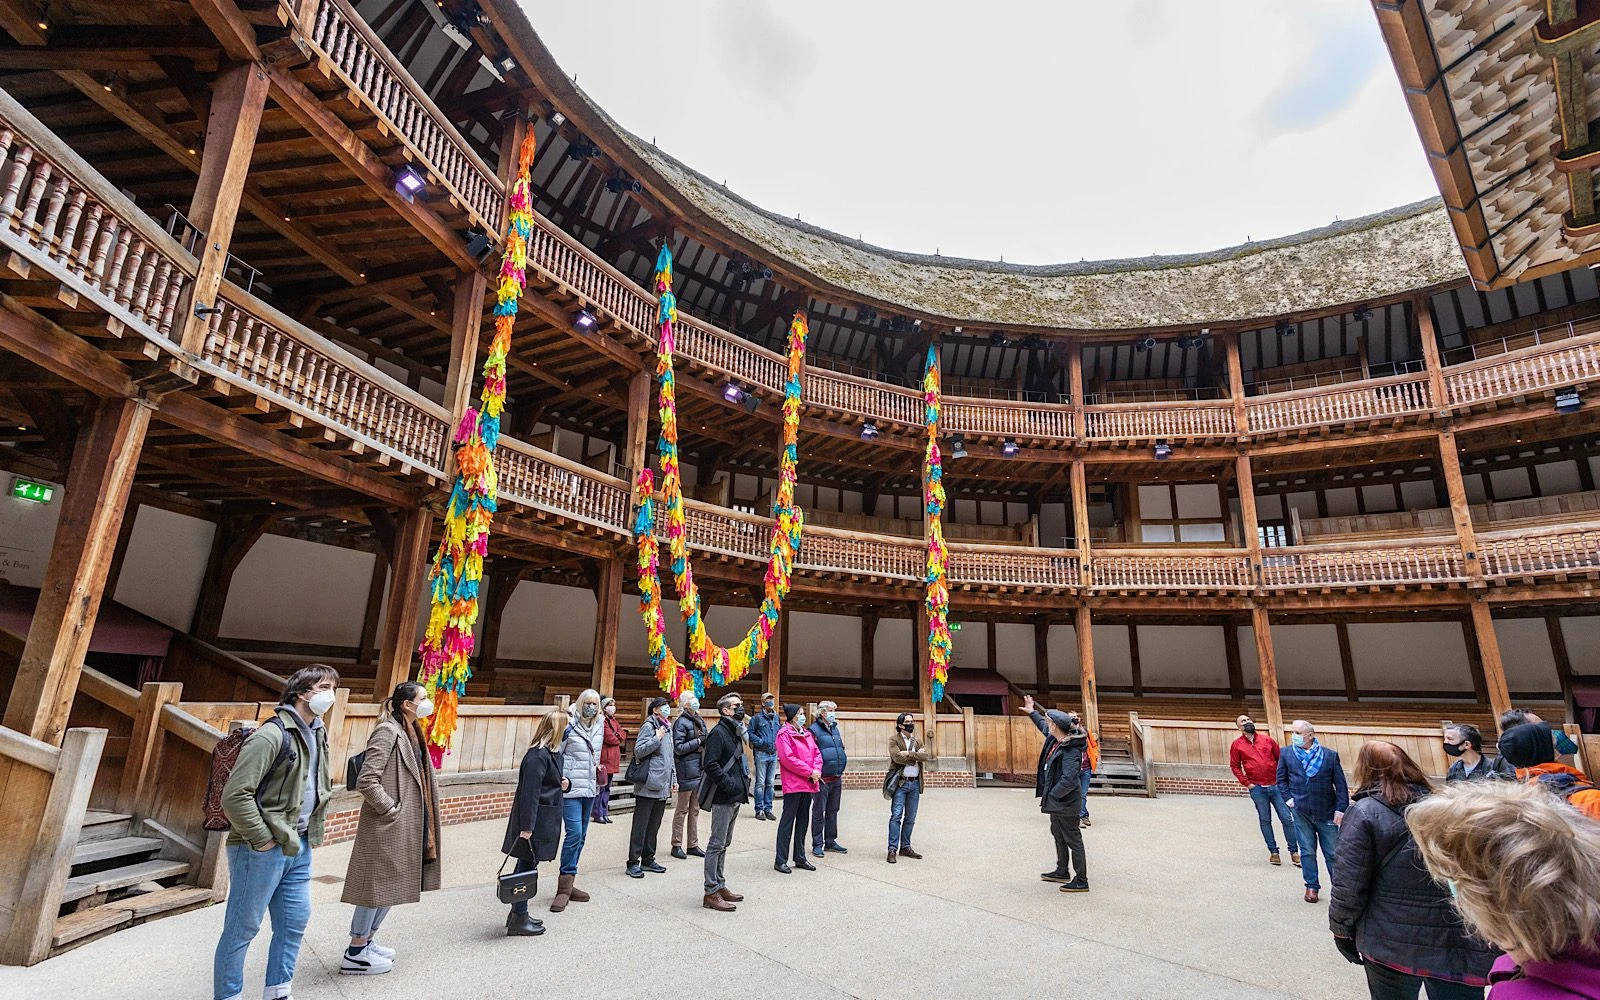 Shakespeare’s Globe Guided Tour: What to expect - 2